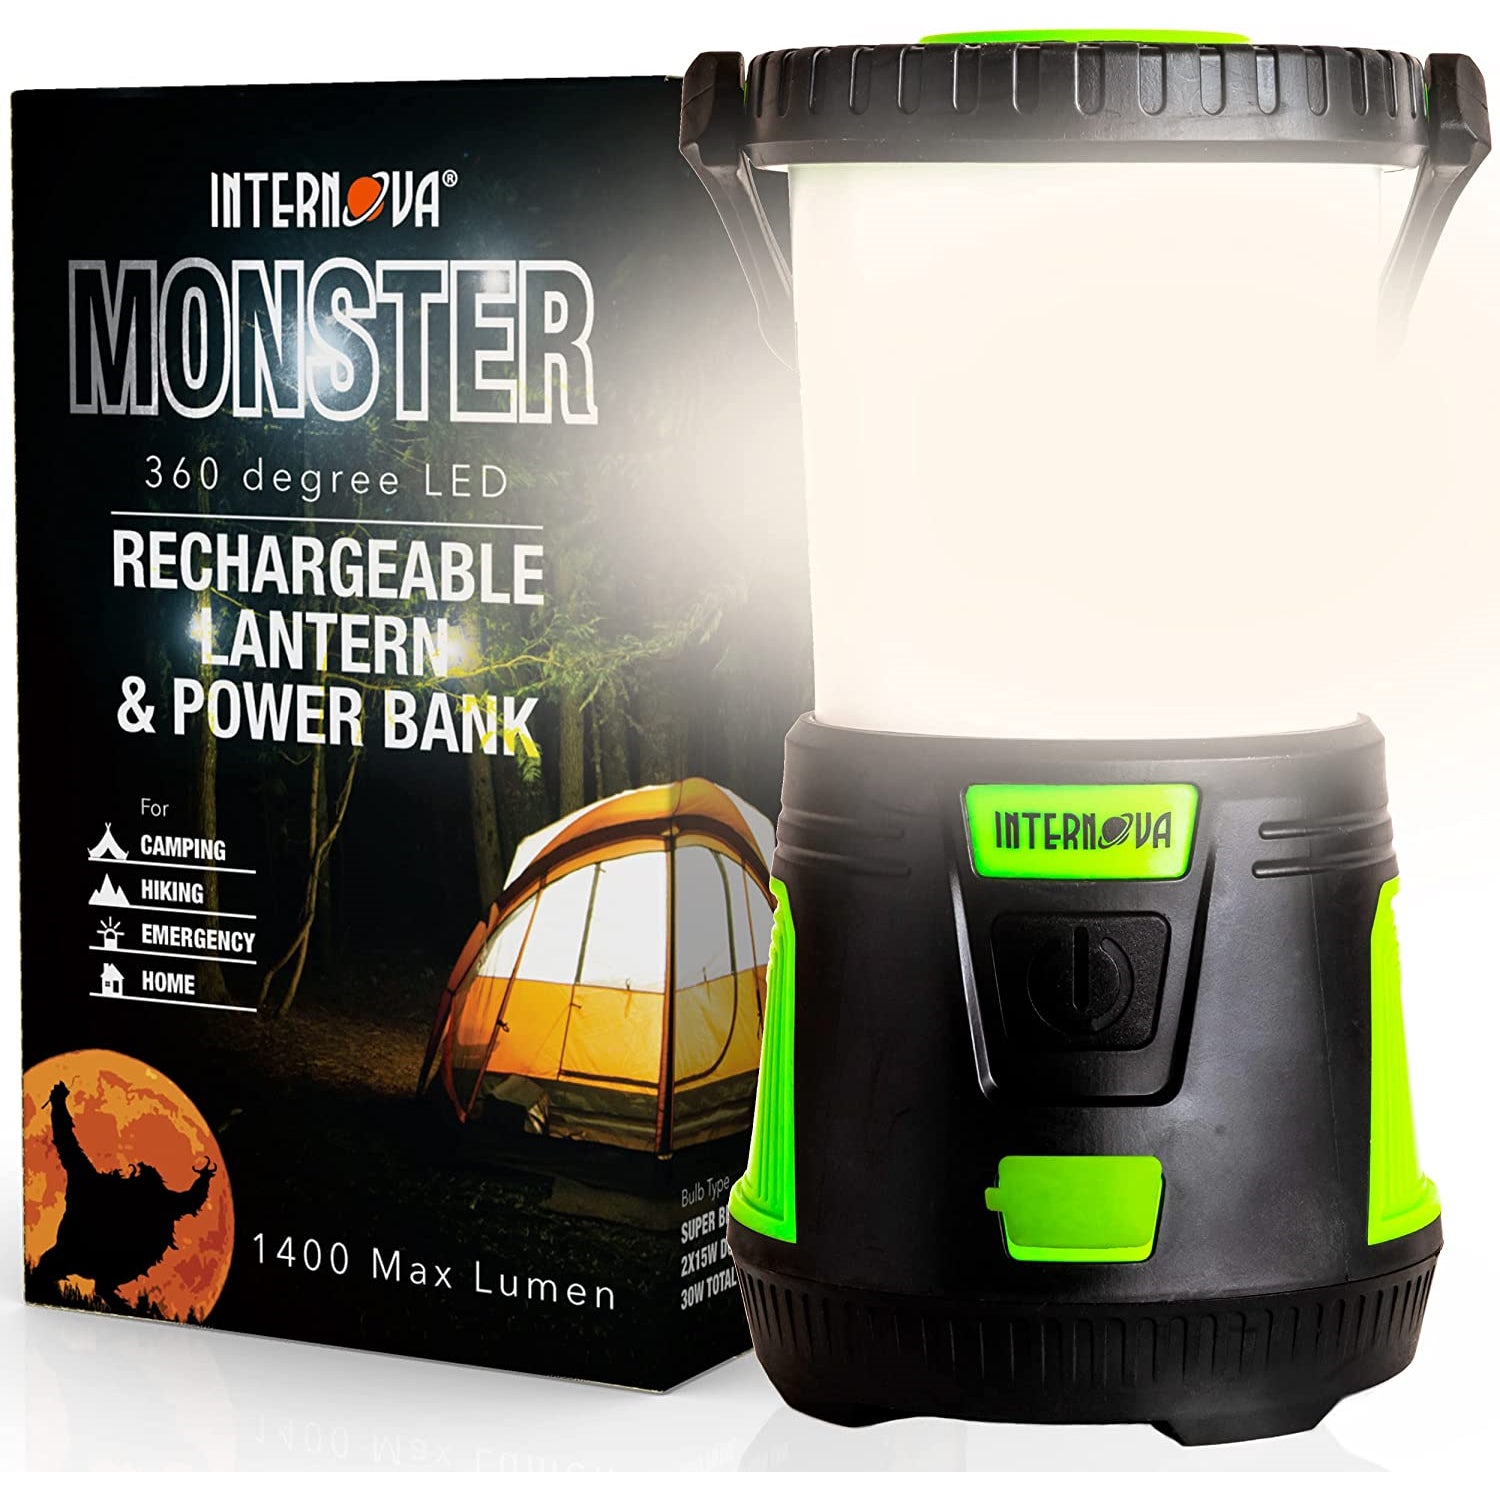 Limited Edition: Save over 54% with the Ultimate LED Camping Lantern, Flashlight & Headlamp Bundle